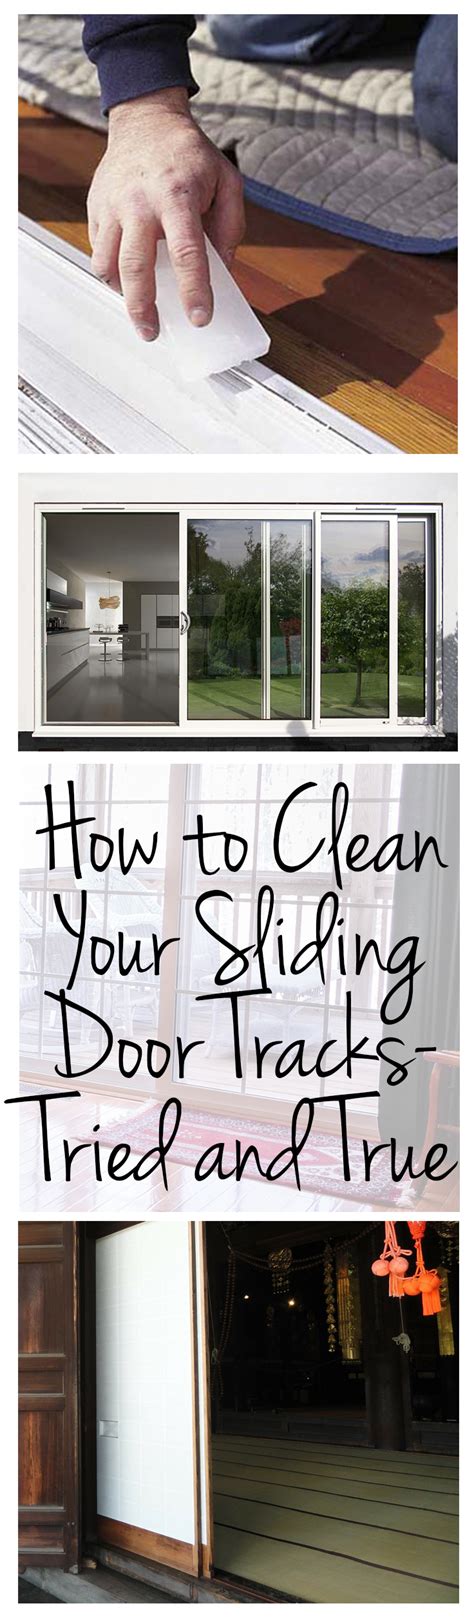 In a spray bottle, mix a cup of hydrogen peroxide and a few squirts of dawn. How to Clean Your Sliding Door Tracks- Tried and True ...